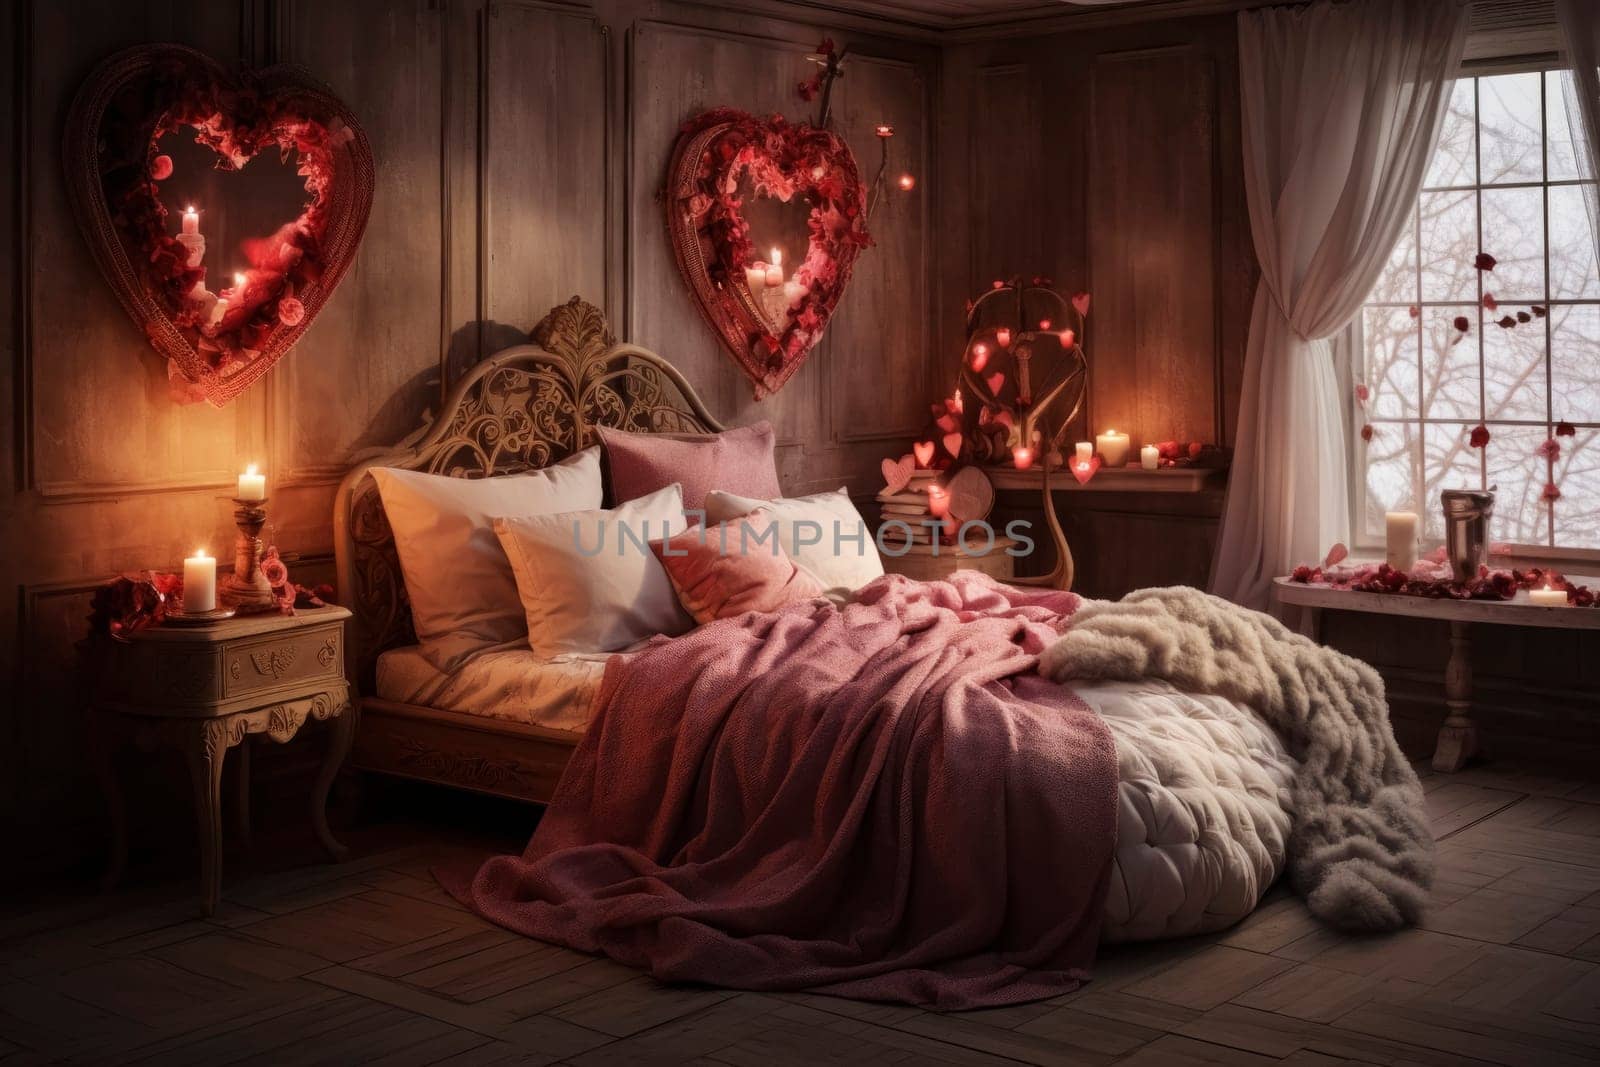 Vintage-inspired bedroom adorned with heart-shaped wreaths and soft lighting, creating a romantic atmosphere with plush bedding and decorative candles.